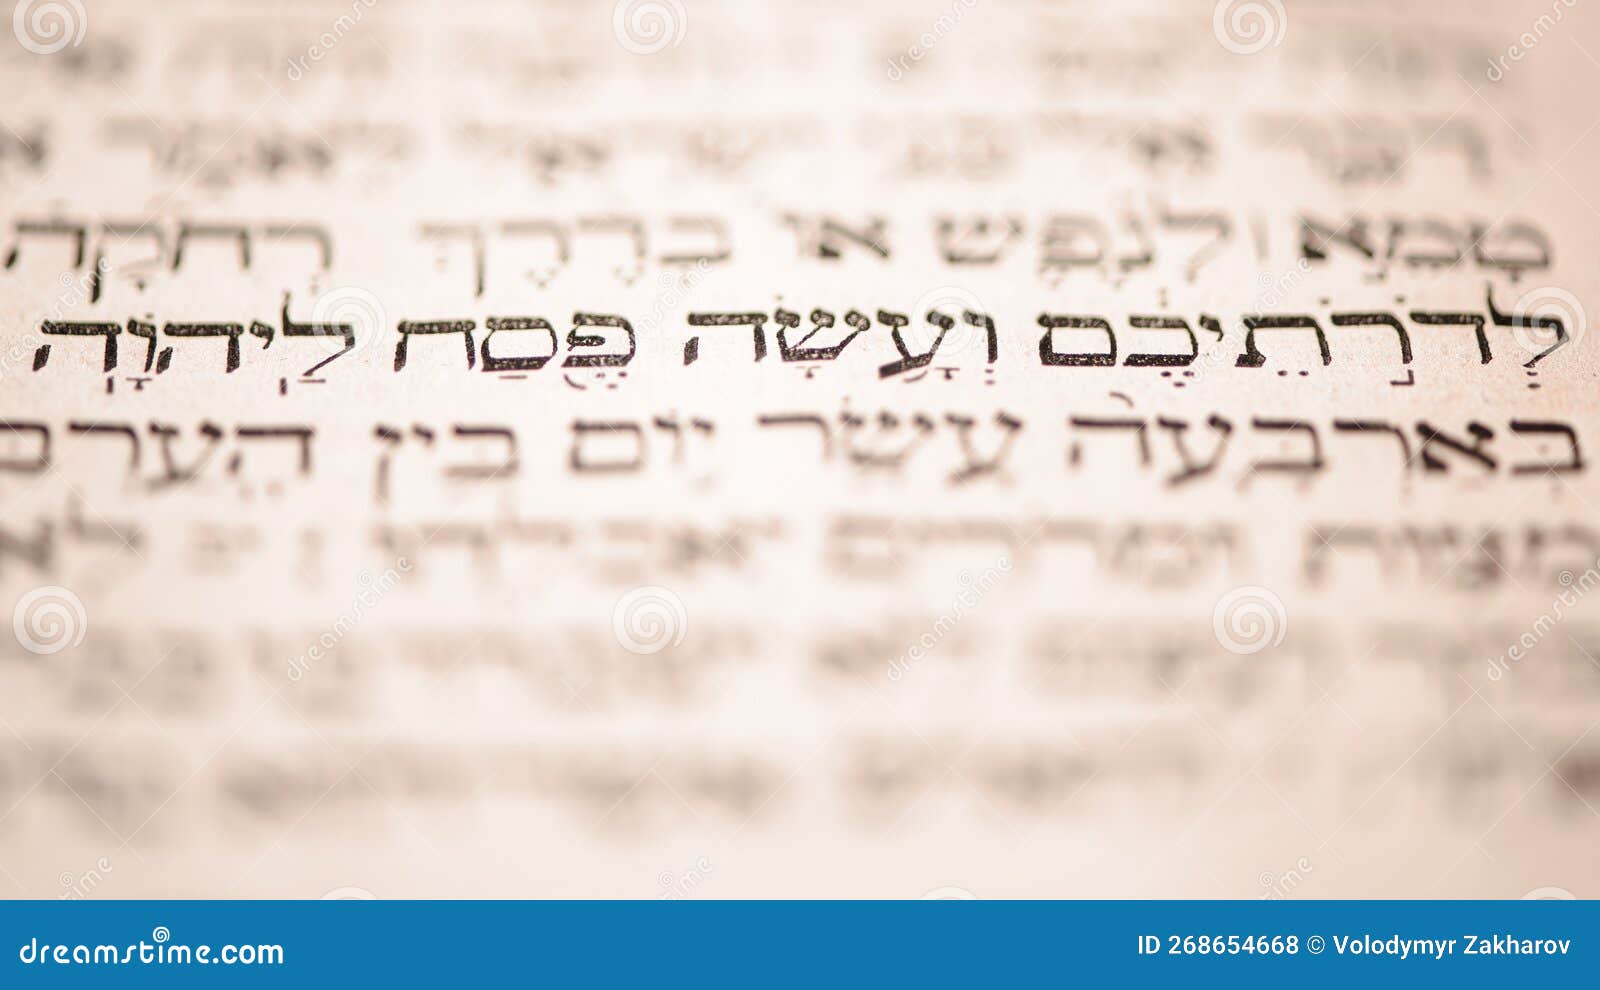 page of old worn shabby jewish book torah. snippet hebrew bible text: offer the passover sacrifice to jehovah. closeup